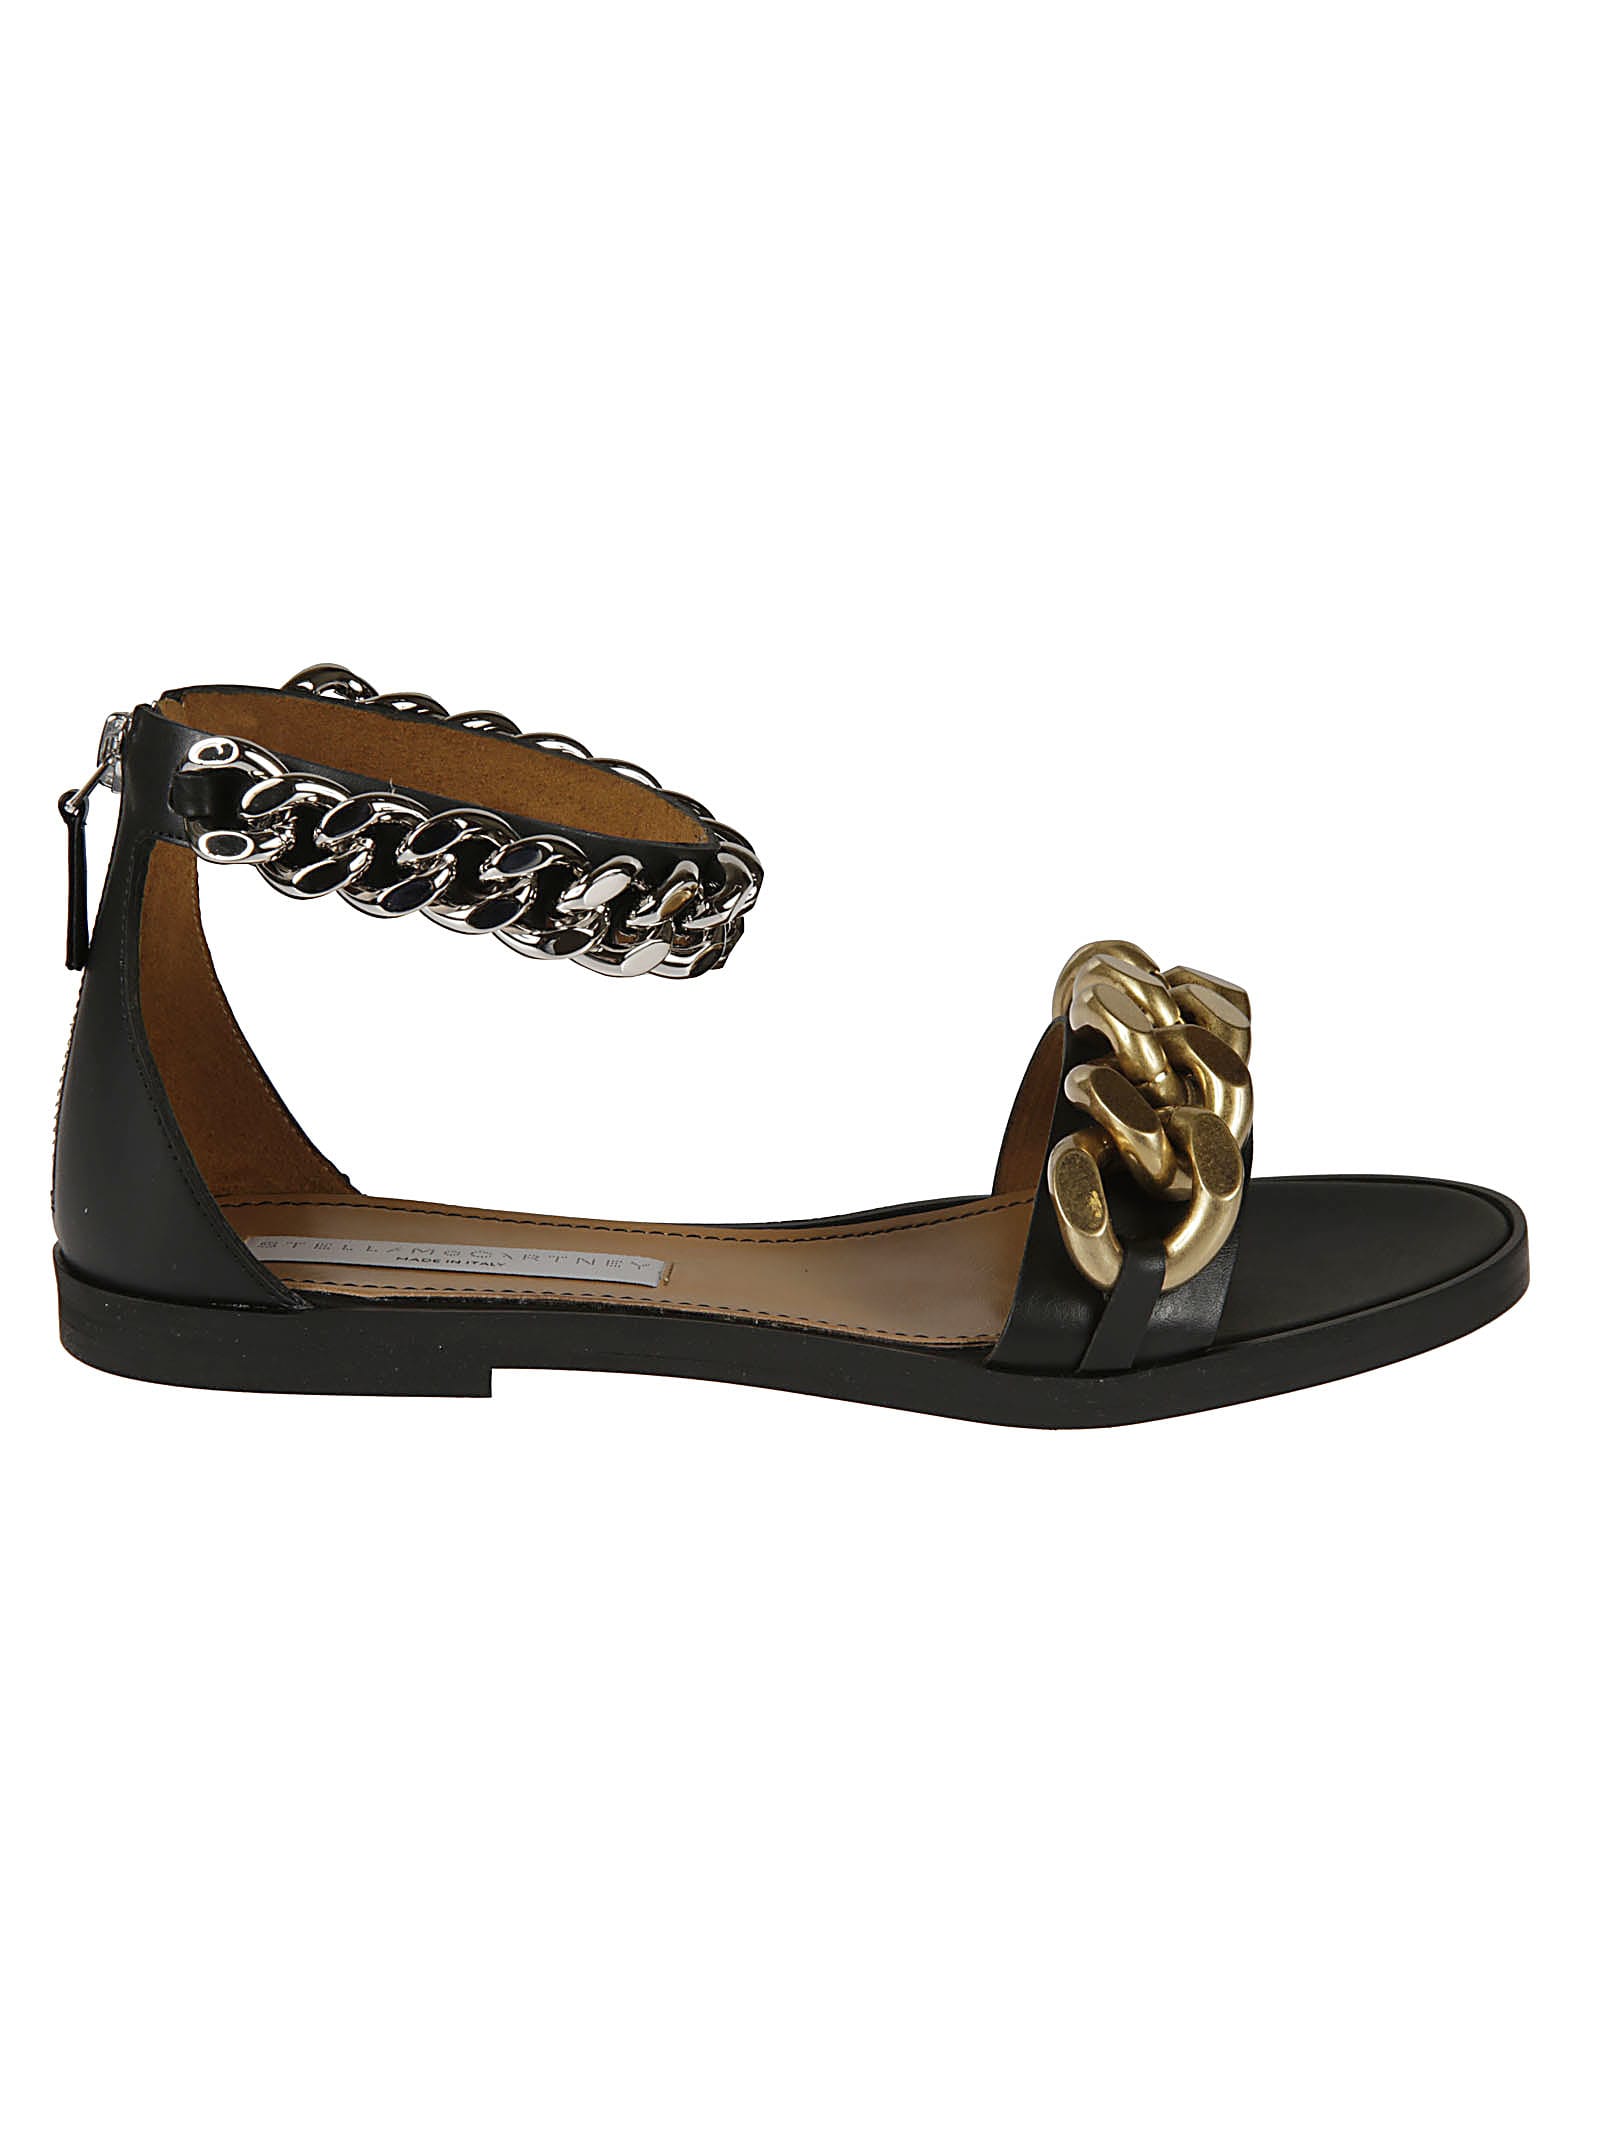 Buy Stella McCartney Chain Applique Flat Sandals online, shop Stella McCartney shoes with free shipping